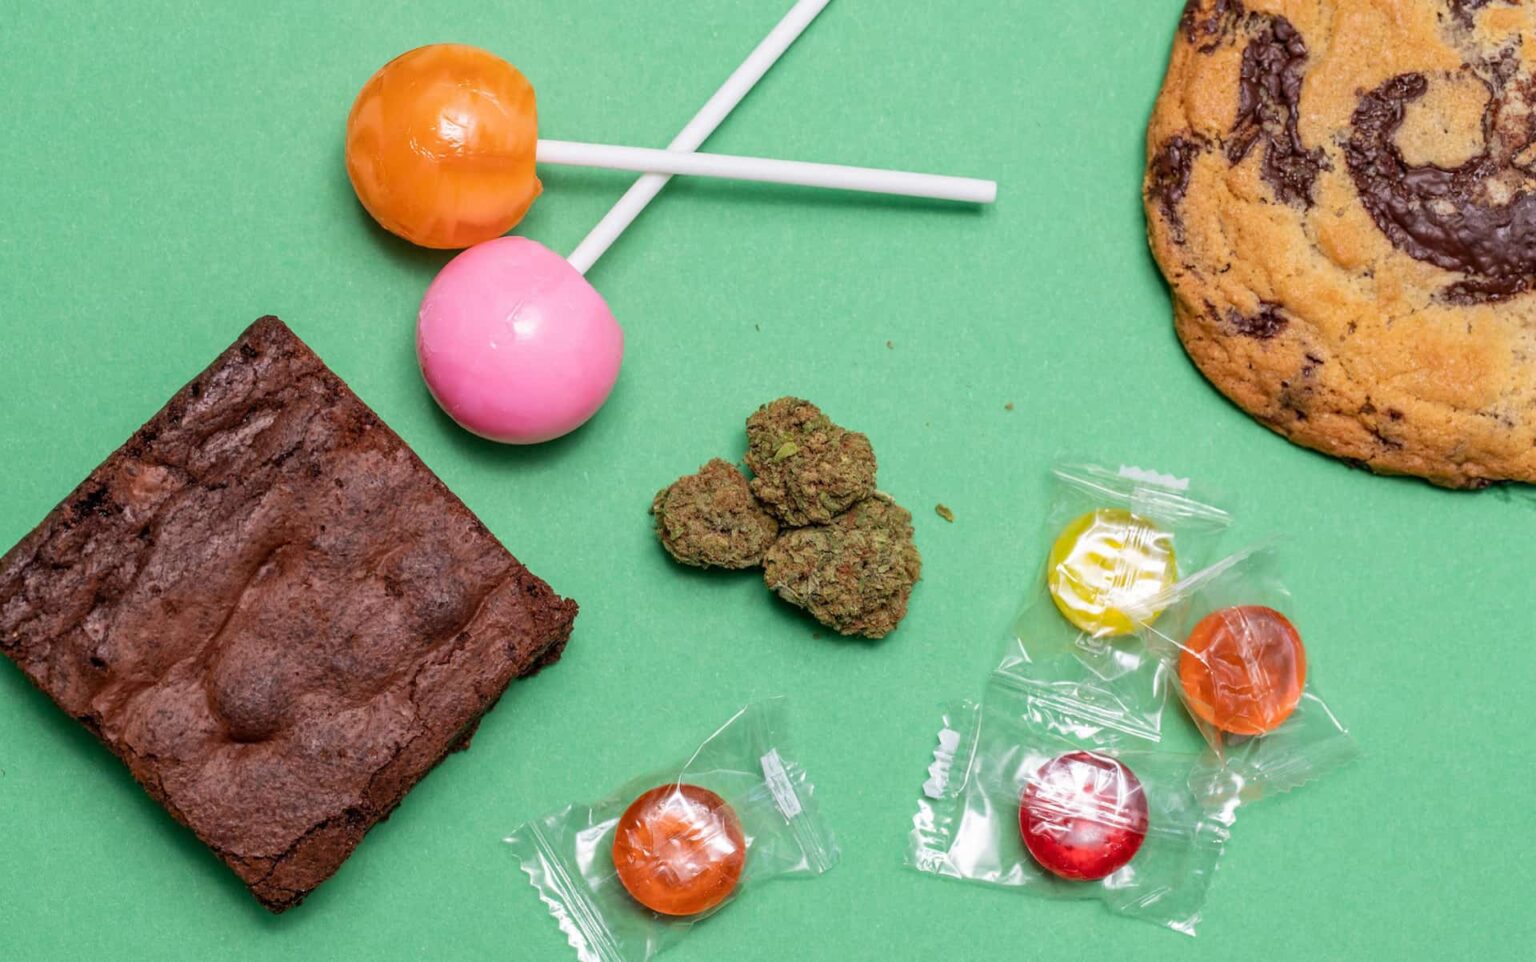 If you've ever eaten too much of an edible, you know that the resulting high can be overwhelming and unpleasant. Here's how to recover from edibles.